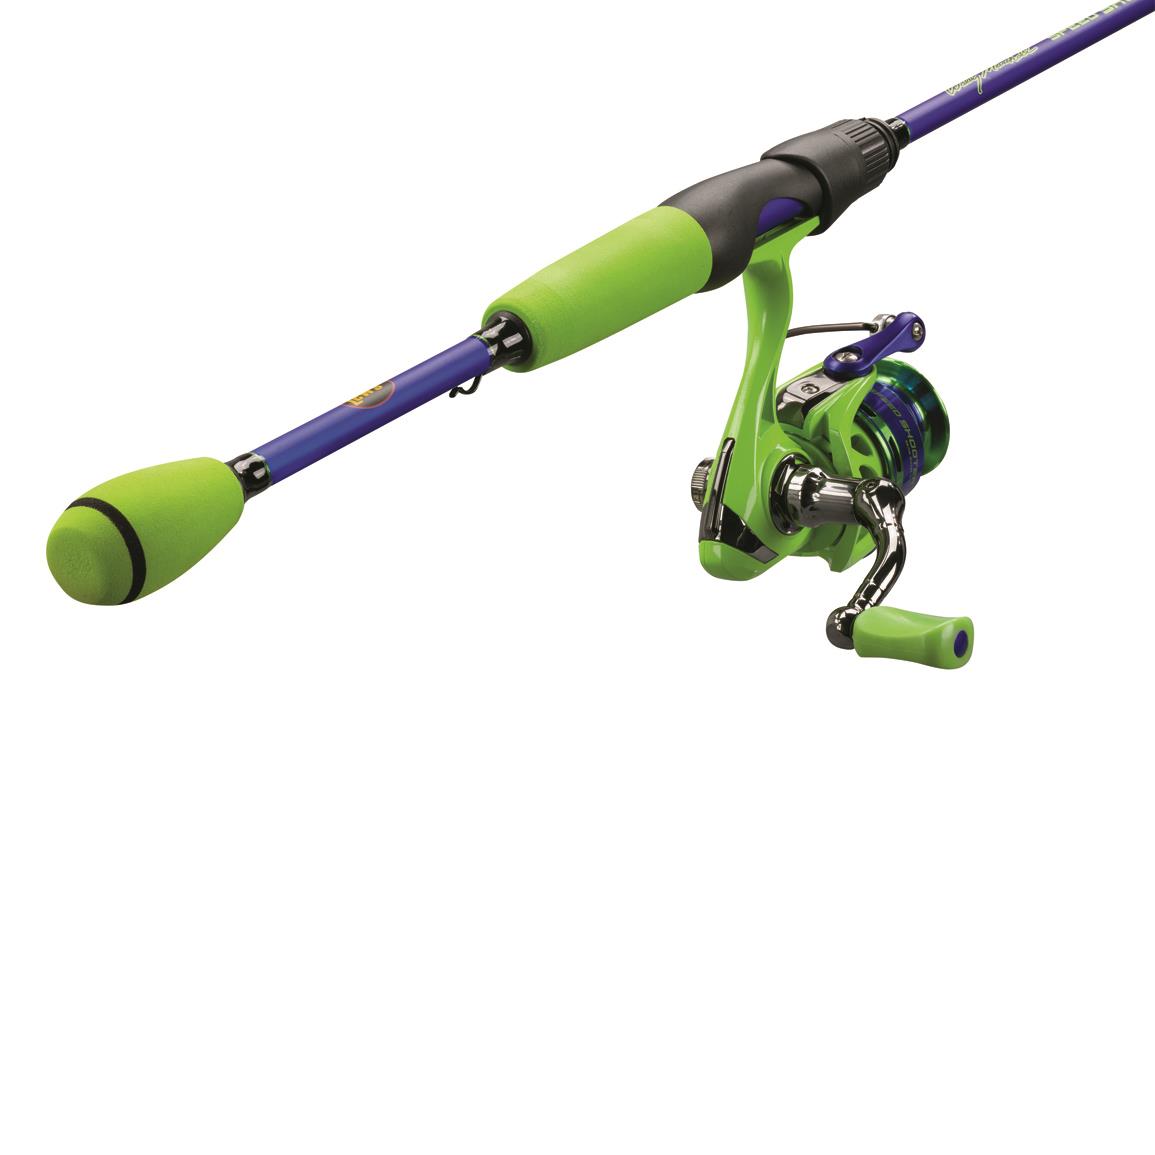 Lew's Wally Marshall Speed Shooter Spinning Reel and Fishing Rod Combo,  6-Foot Rod, Size 100 Reel, Green/Blue 